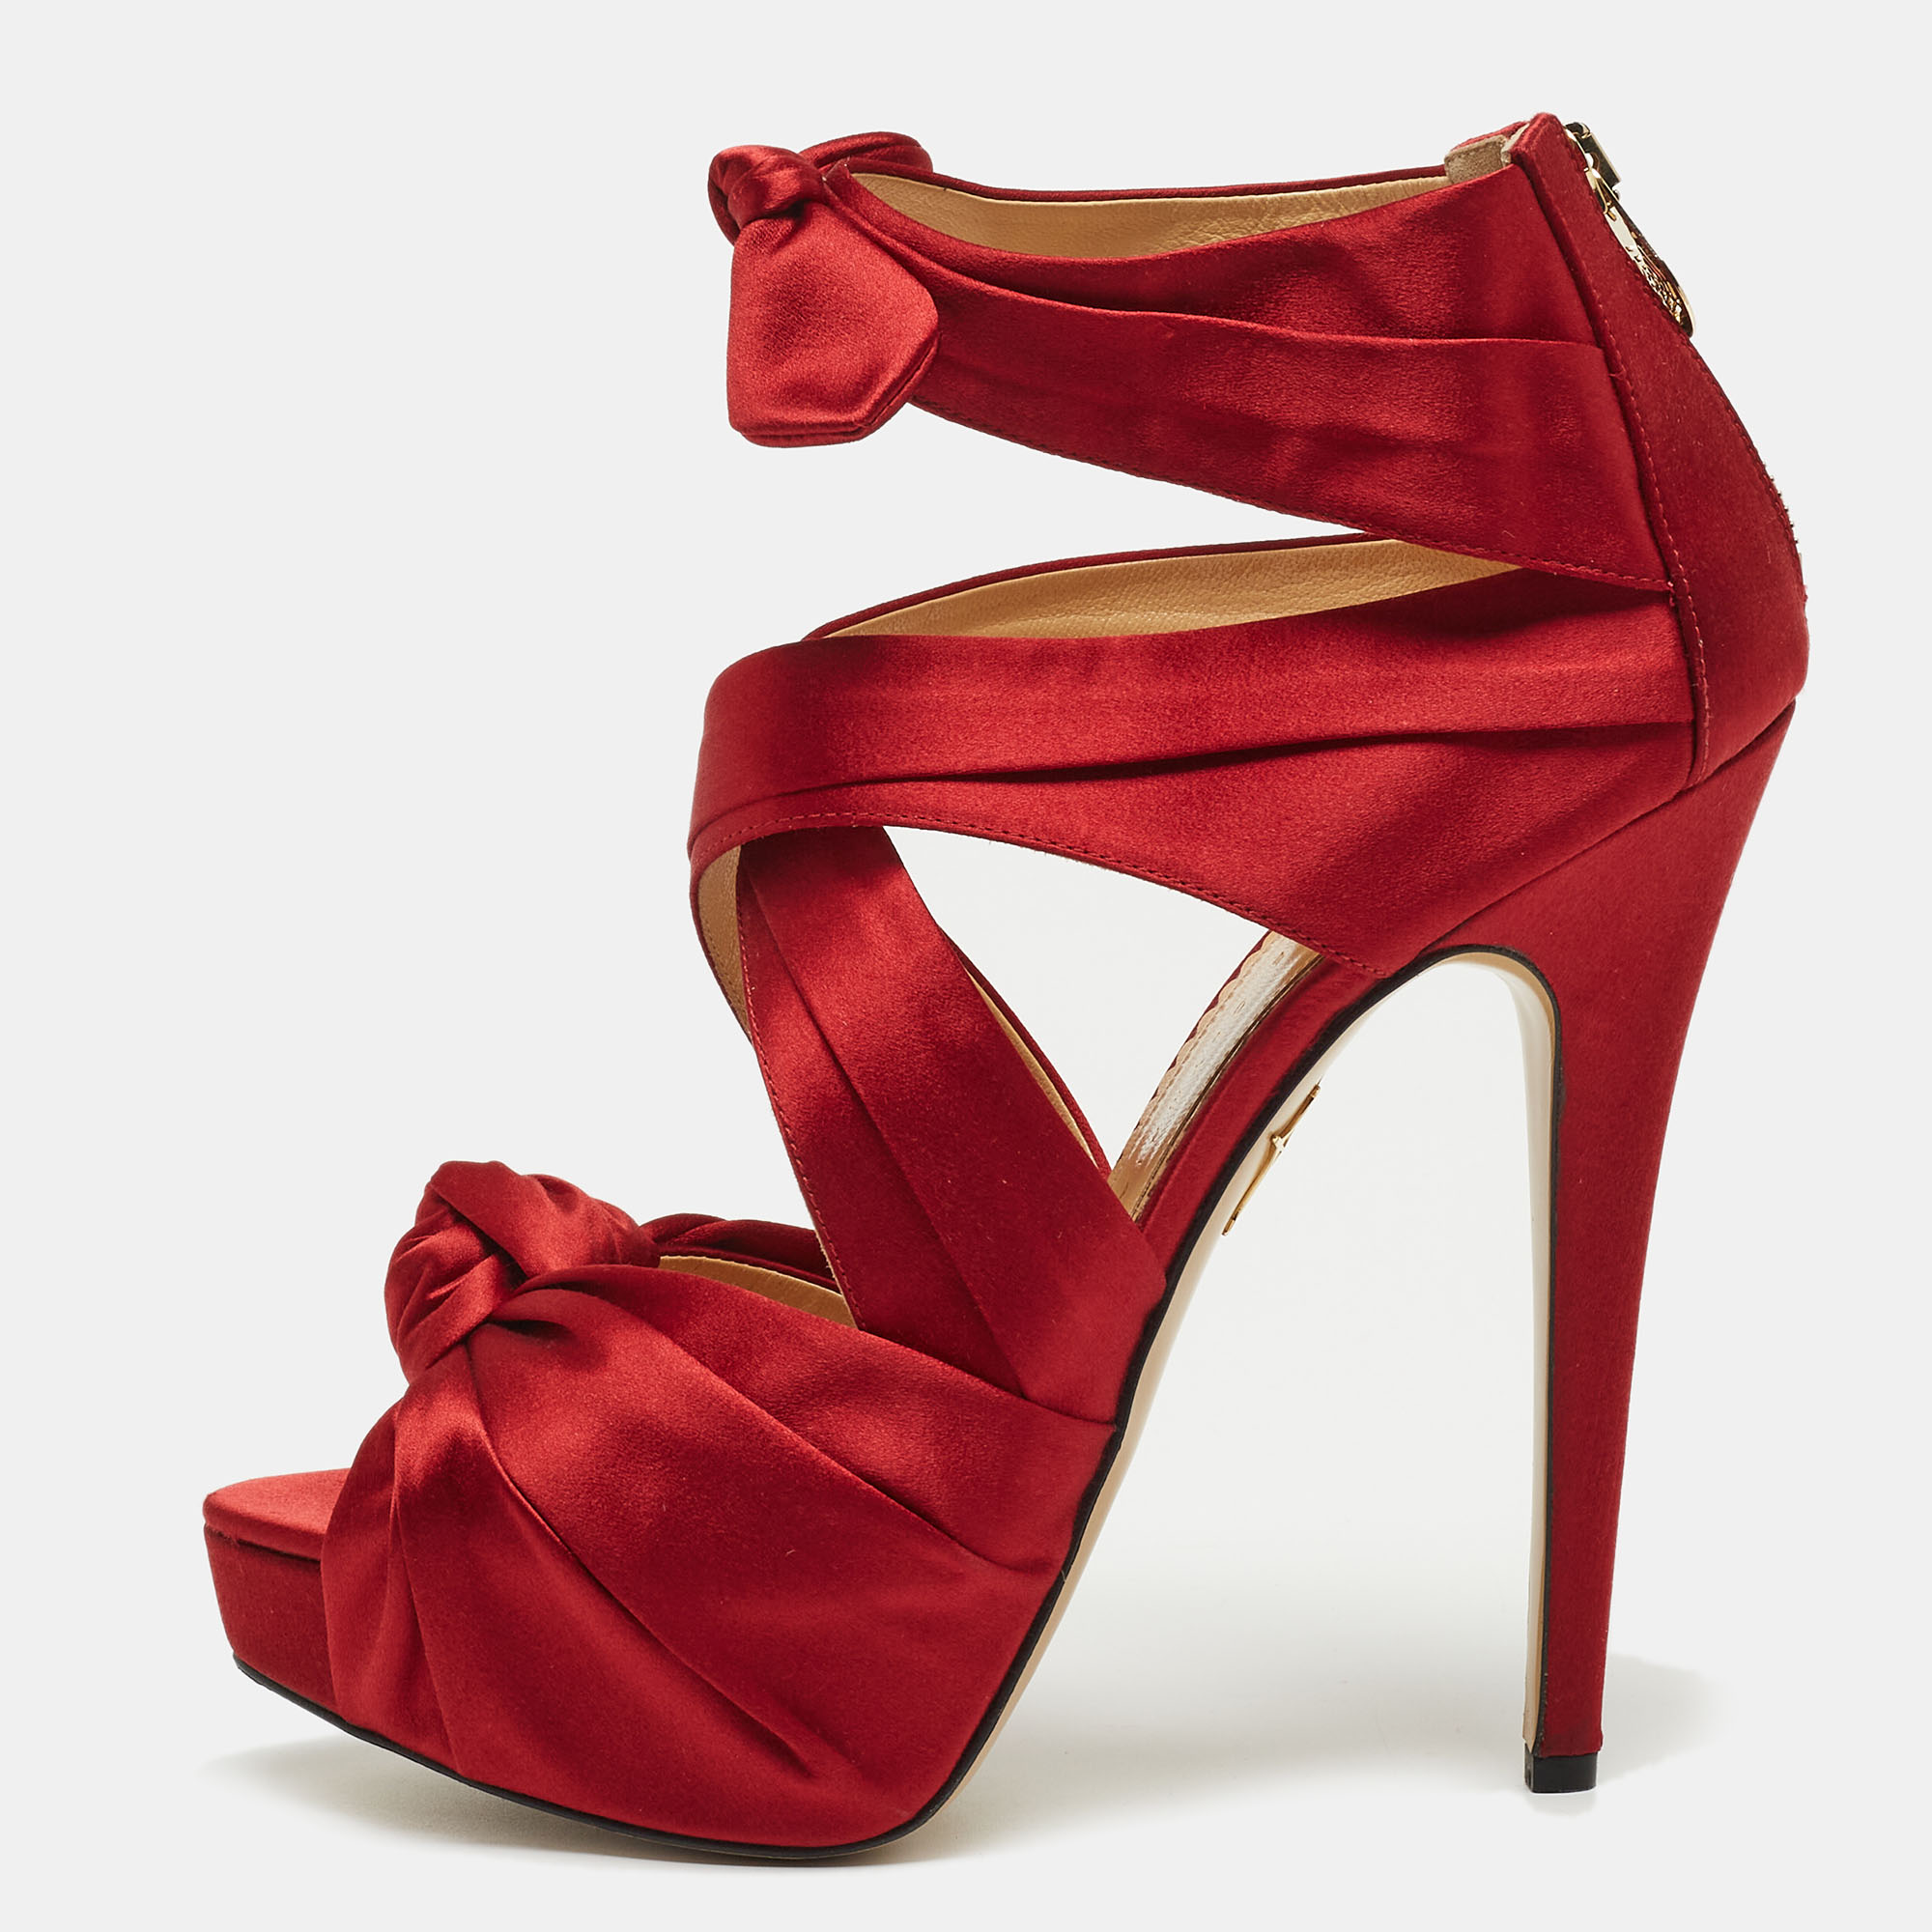 Charlotte Olympia Red Satin Andrea Knotted Platform Sandals Size 41